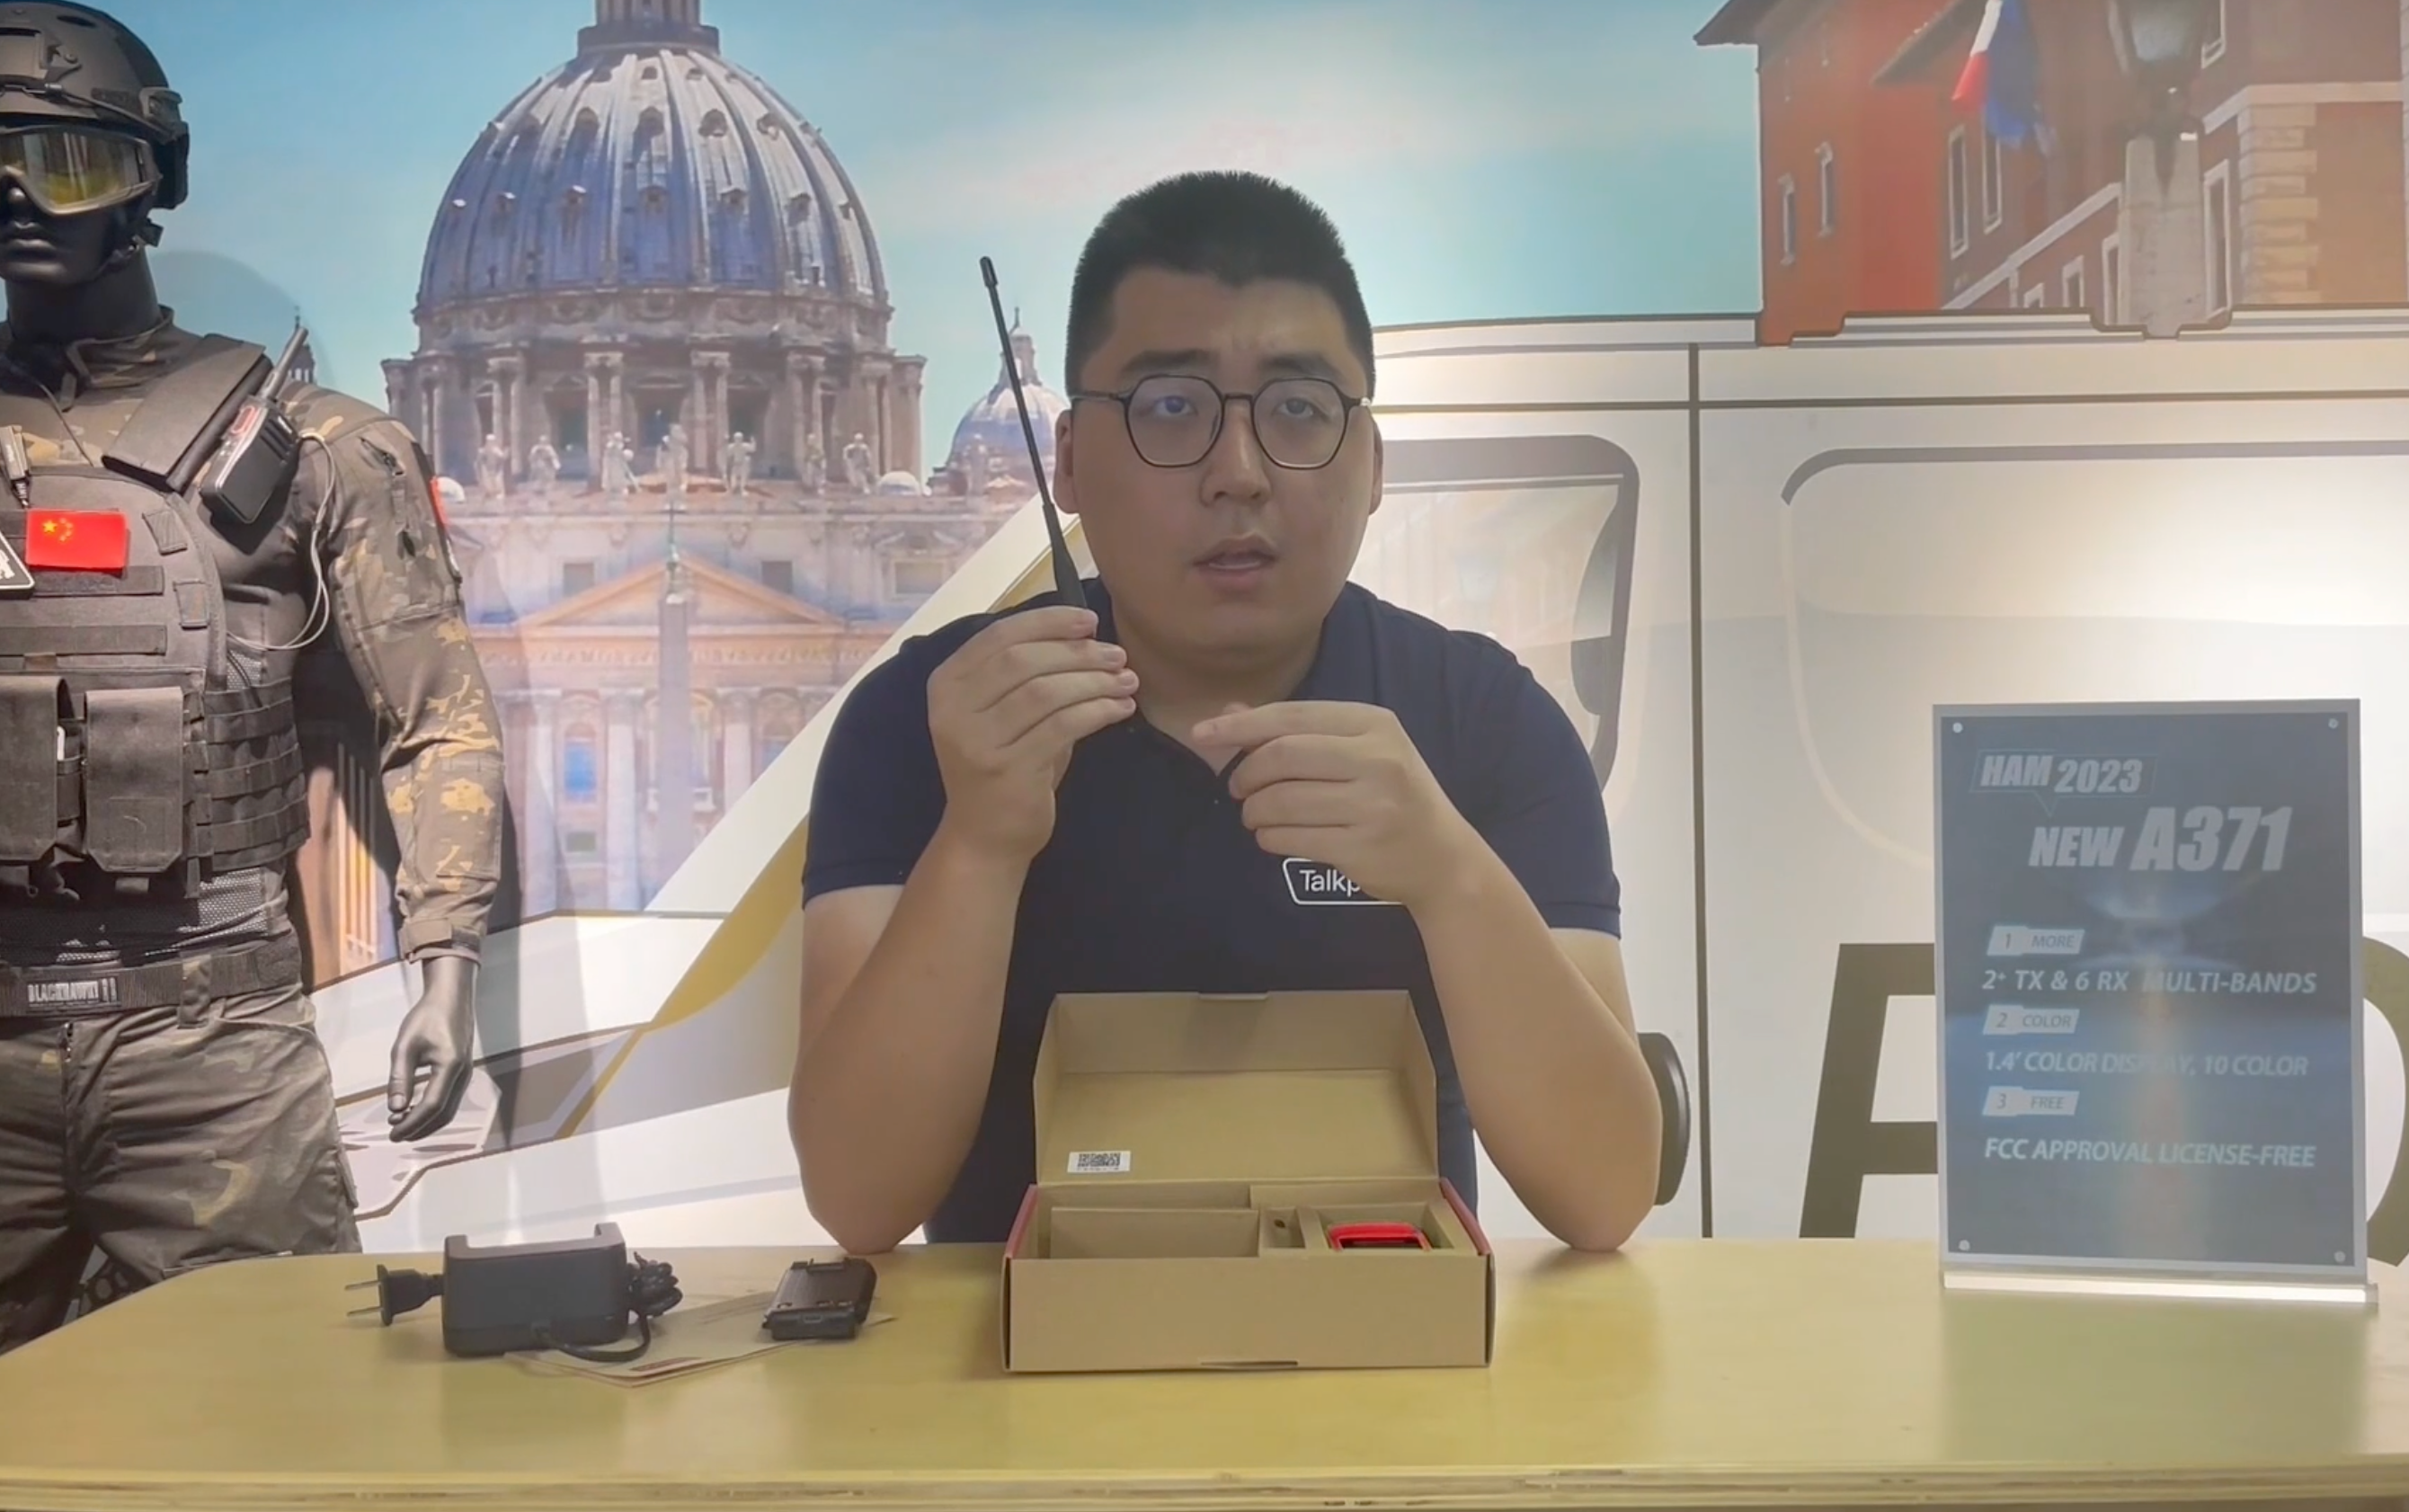 Unboxing A371 HAM GMRS radio